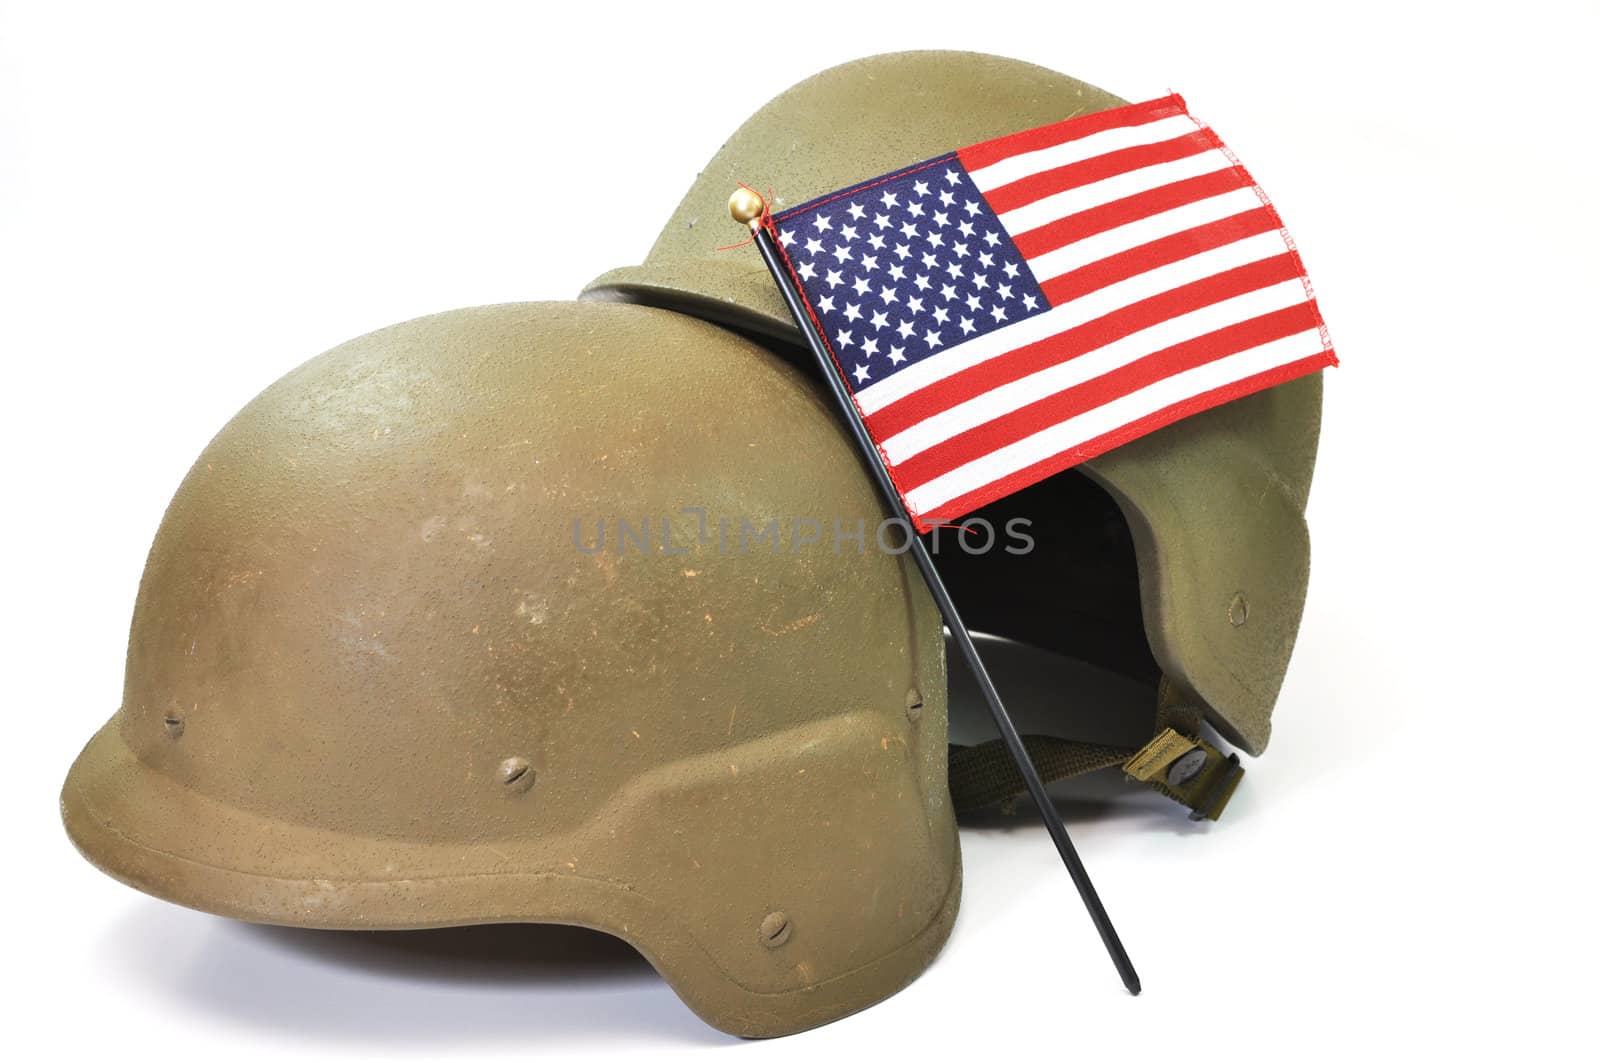 Military helmets and American flag isolated on white background.